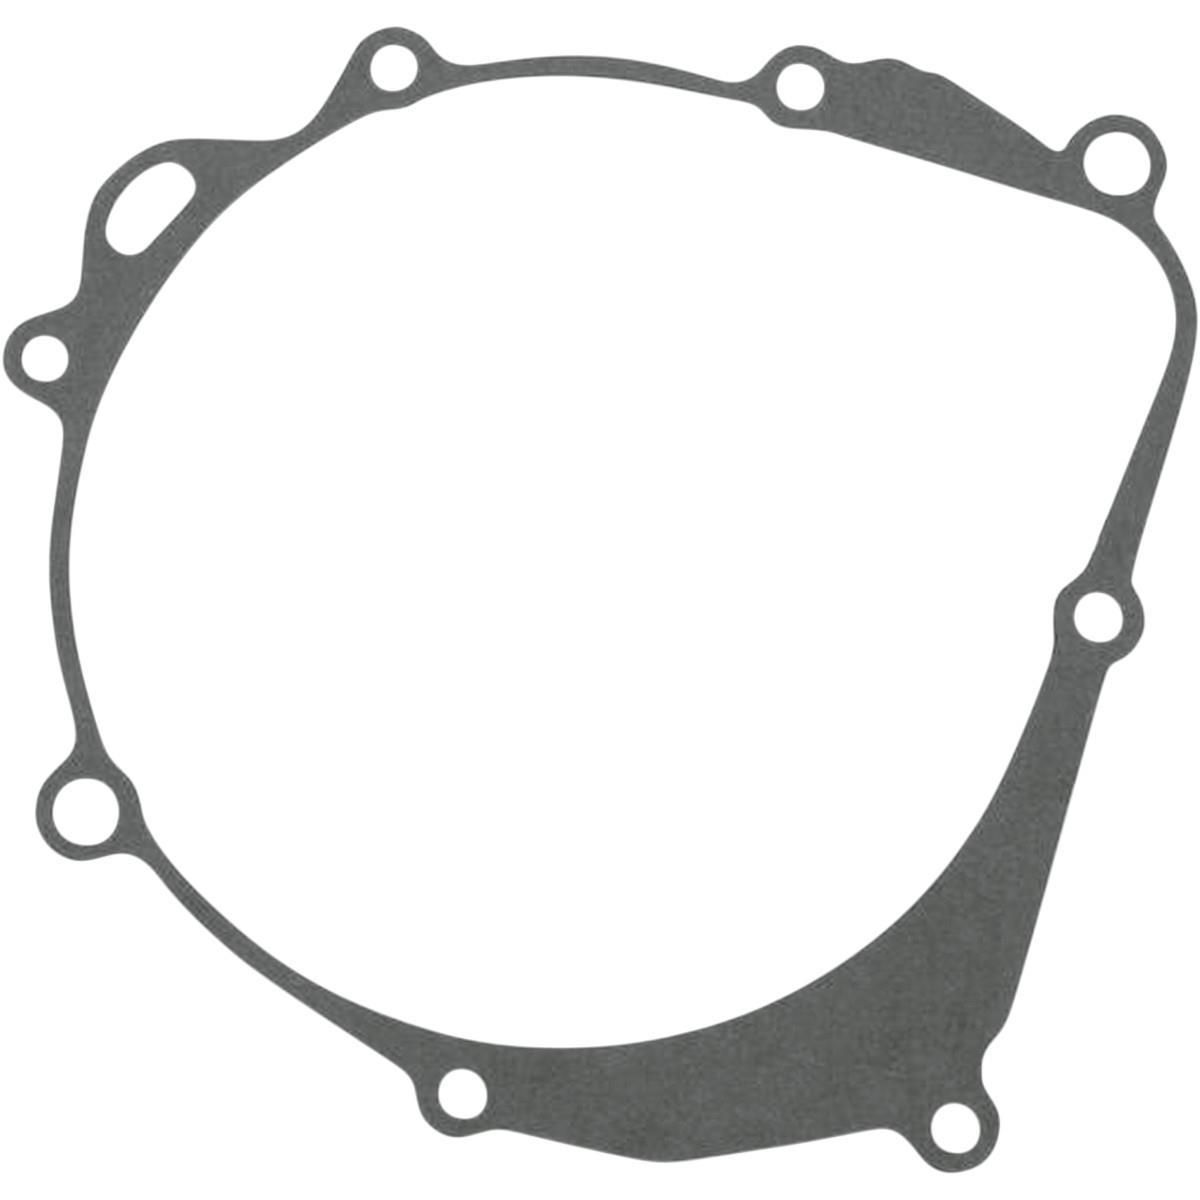 13DH-MOOSE-RACIN-09340579 Ignition Cover Gasket